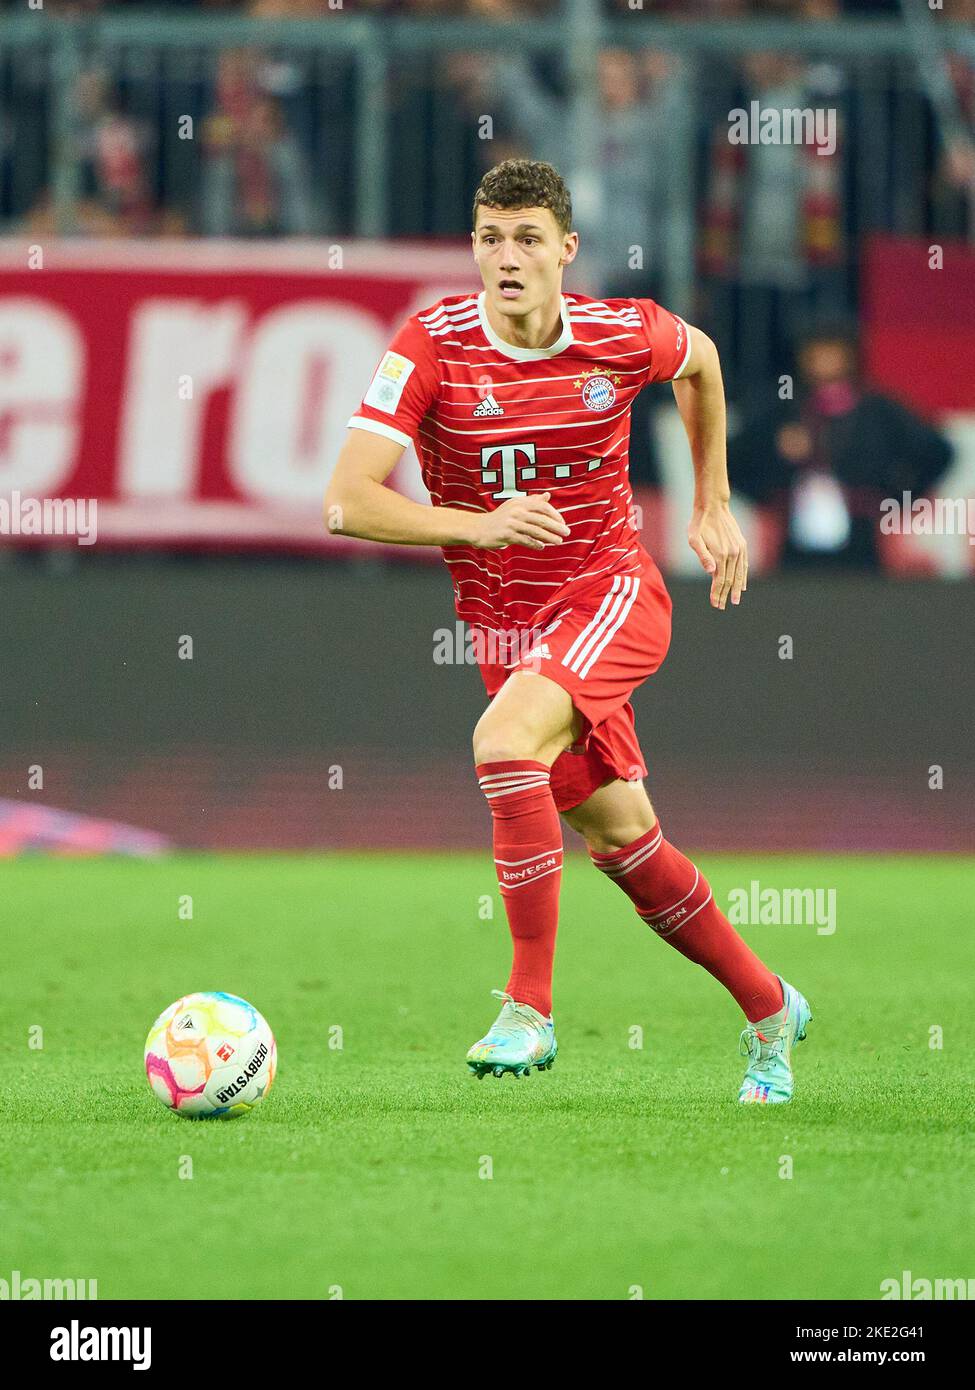 Benjamin PAVARD, FCB 5   in the match FC BAYERN MÜNCHEN - SV WERDER BREMEN 6-1 1.German Football League on Nov 8, 2022 in Munich, Germany. Season 2022/2023, matchday 14, 1.Bundesliga, FCB, München, 14.Spieltag © Peter Schatz / Alamy Live News    - DFL REGULATIONS PROHIBIT ANY USE OF PHOTOGRAPHS as IMAGE SEQUENCES and/or QUASI-VIDEO - Stock Photo